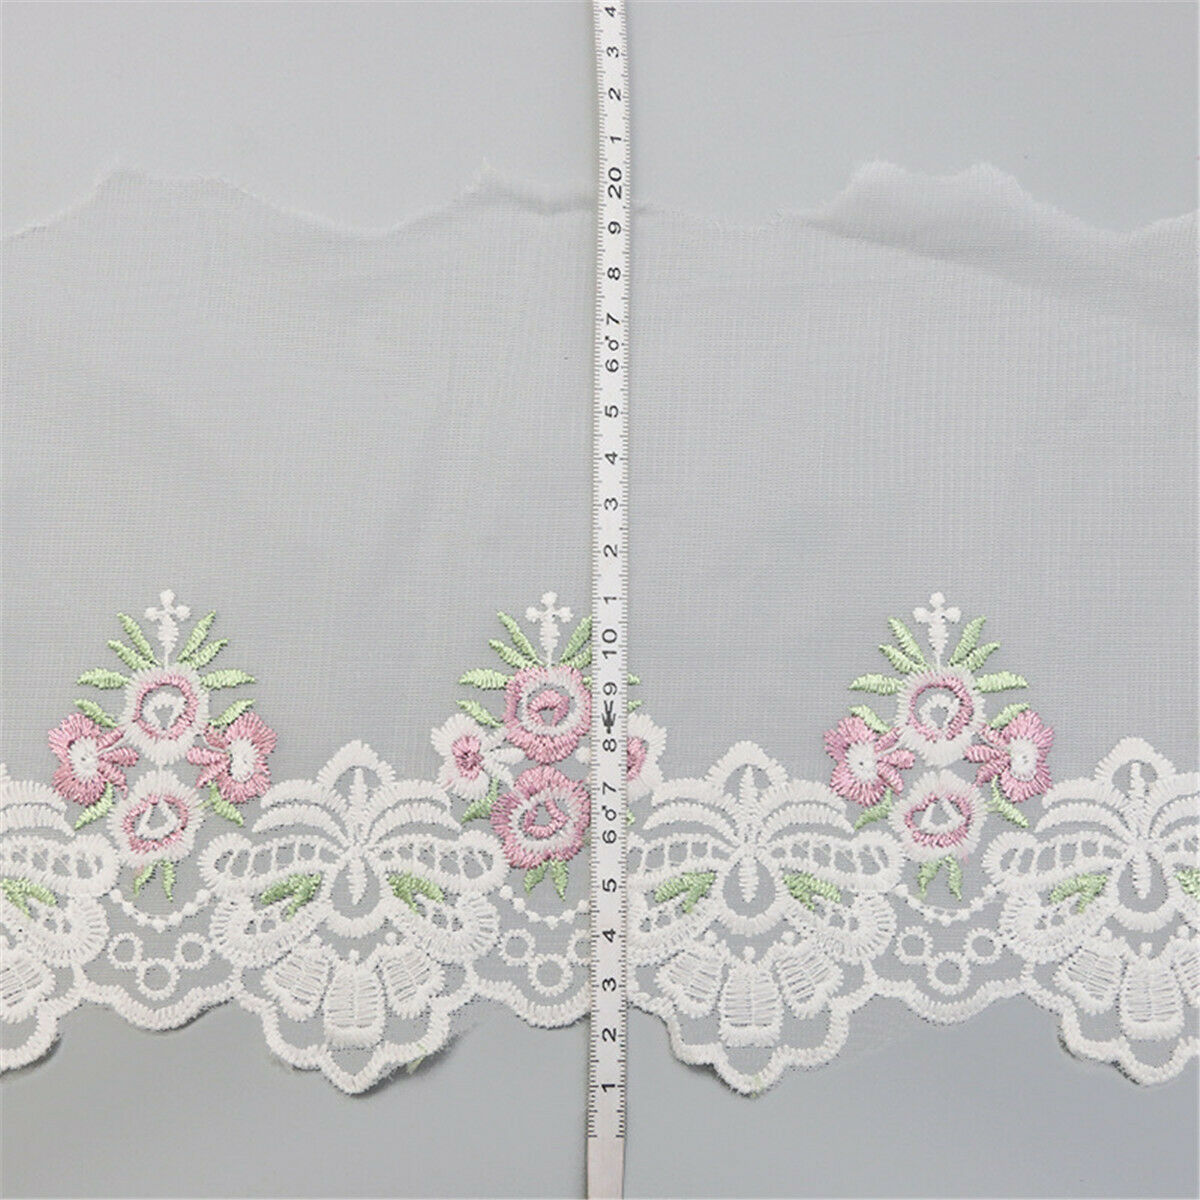 1 Yd Floral Embroidery Cotton Lace Trim Ribbon Fabric Craft Sewing Applique DIY